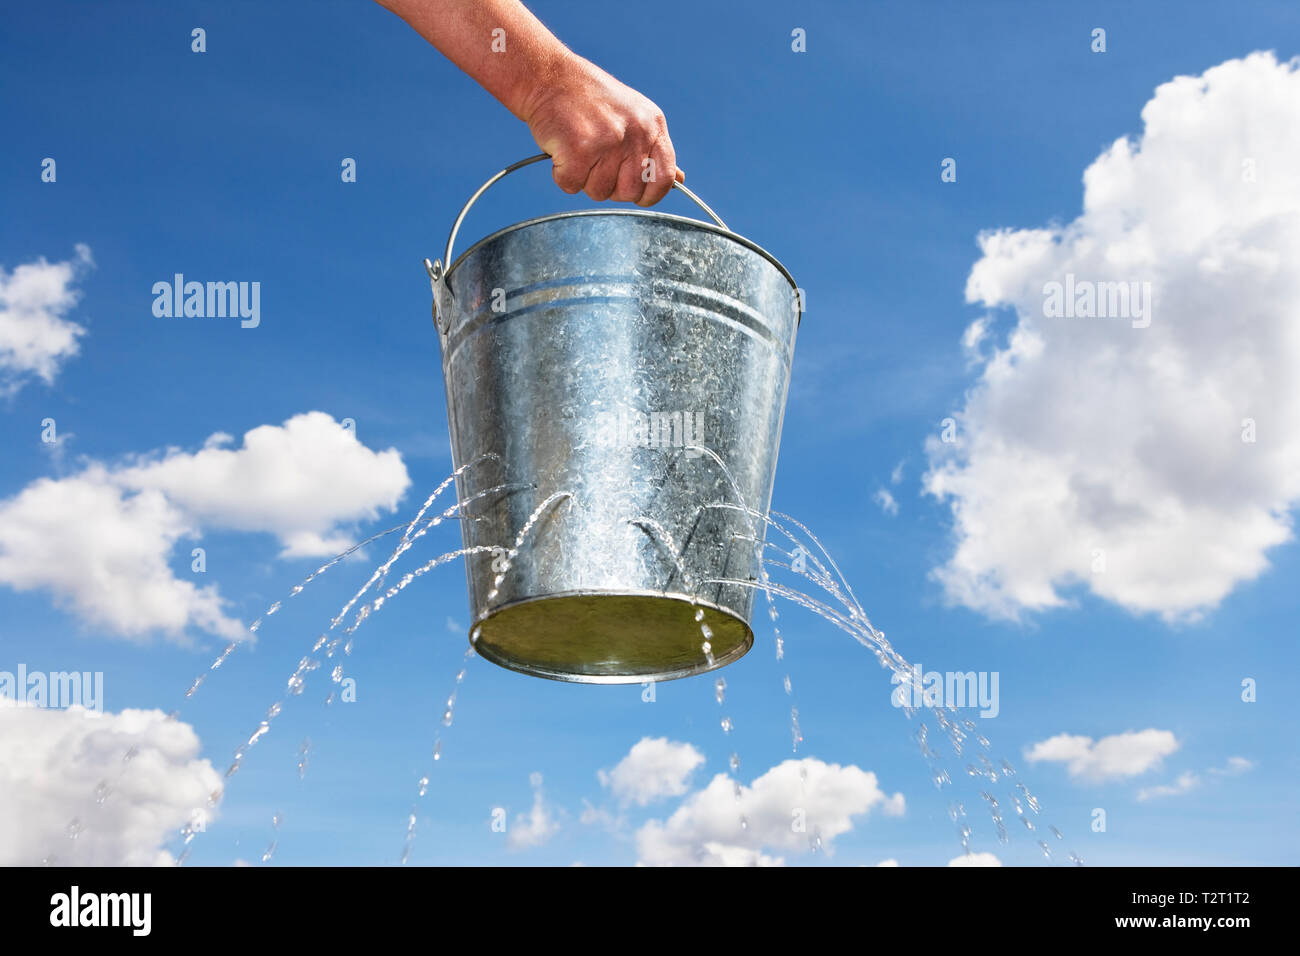 A caucasian man holding bucket with holes leaking water Stock Photo